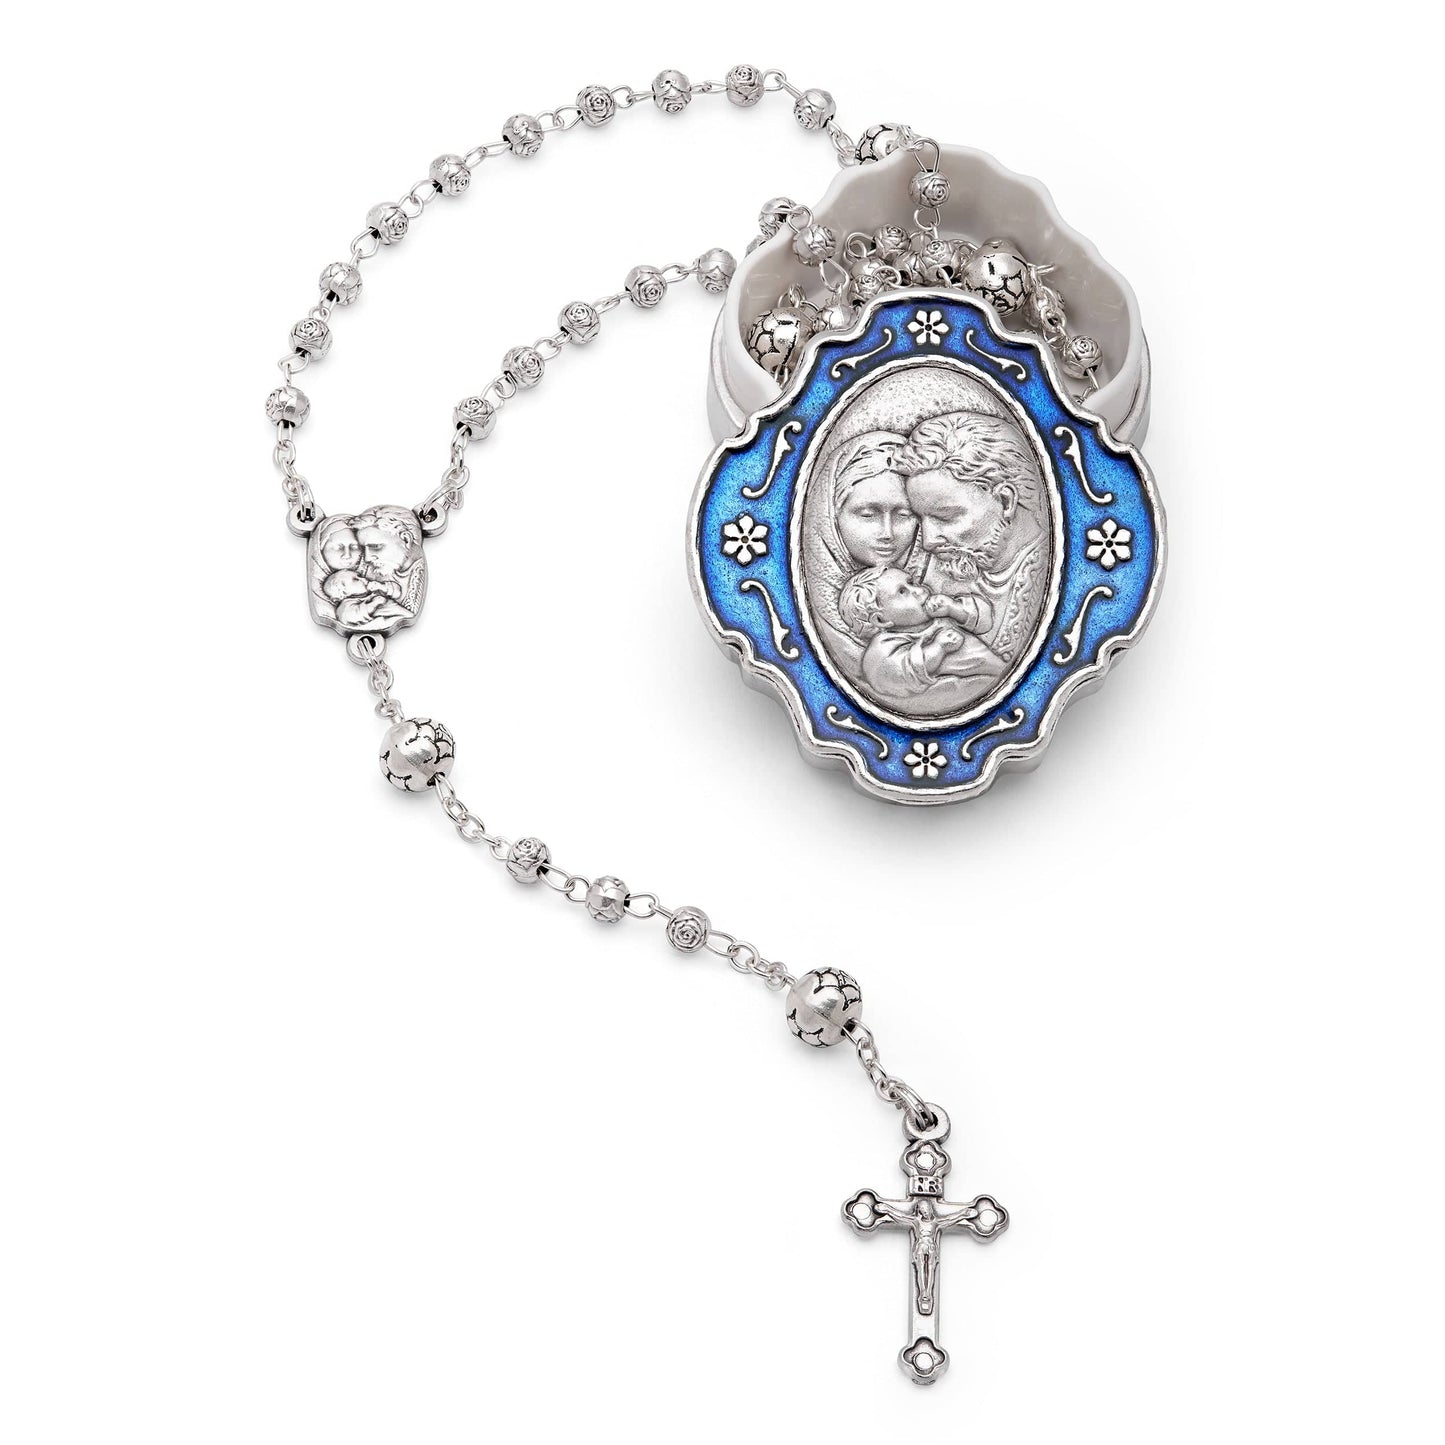 MONDO CATTOLICO Prayer Beads 37 cm (14.56 in) / 4 mm (0.15 in) Blue Keepsake Case and Rosary of the Holy Family